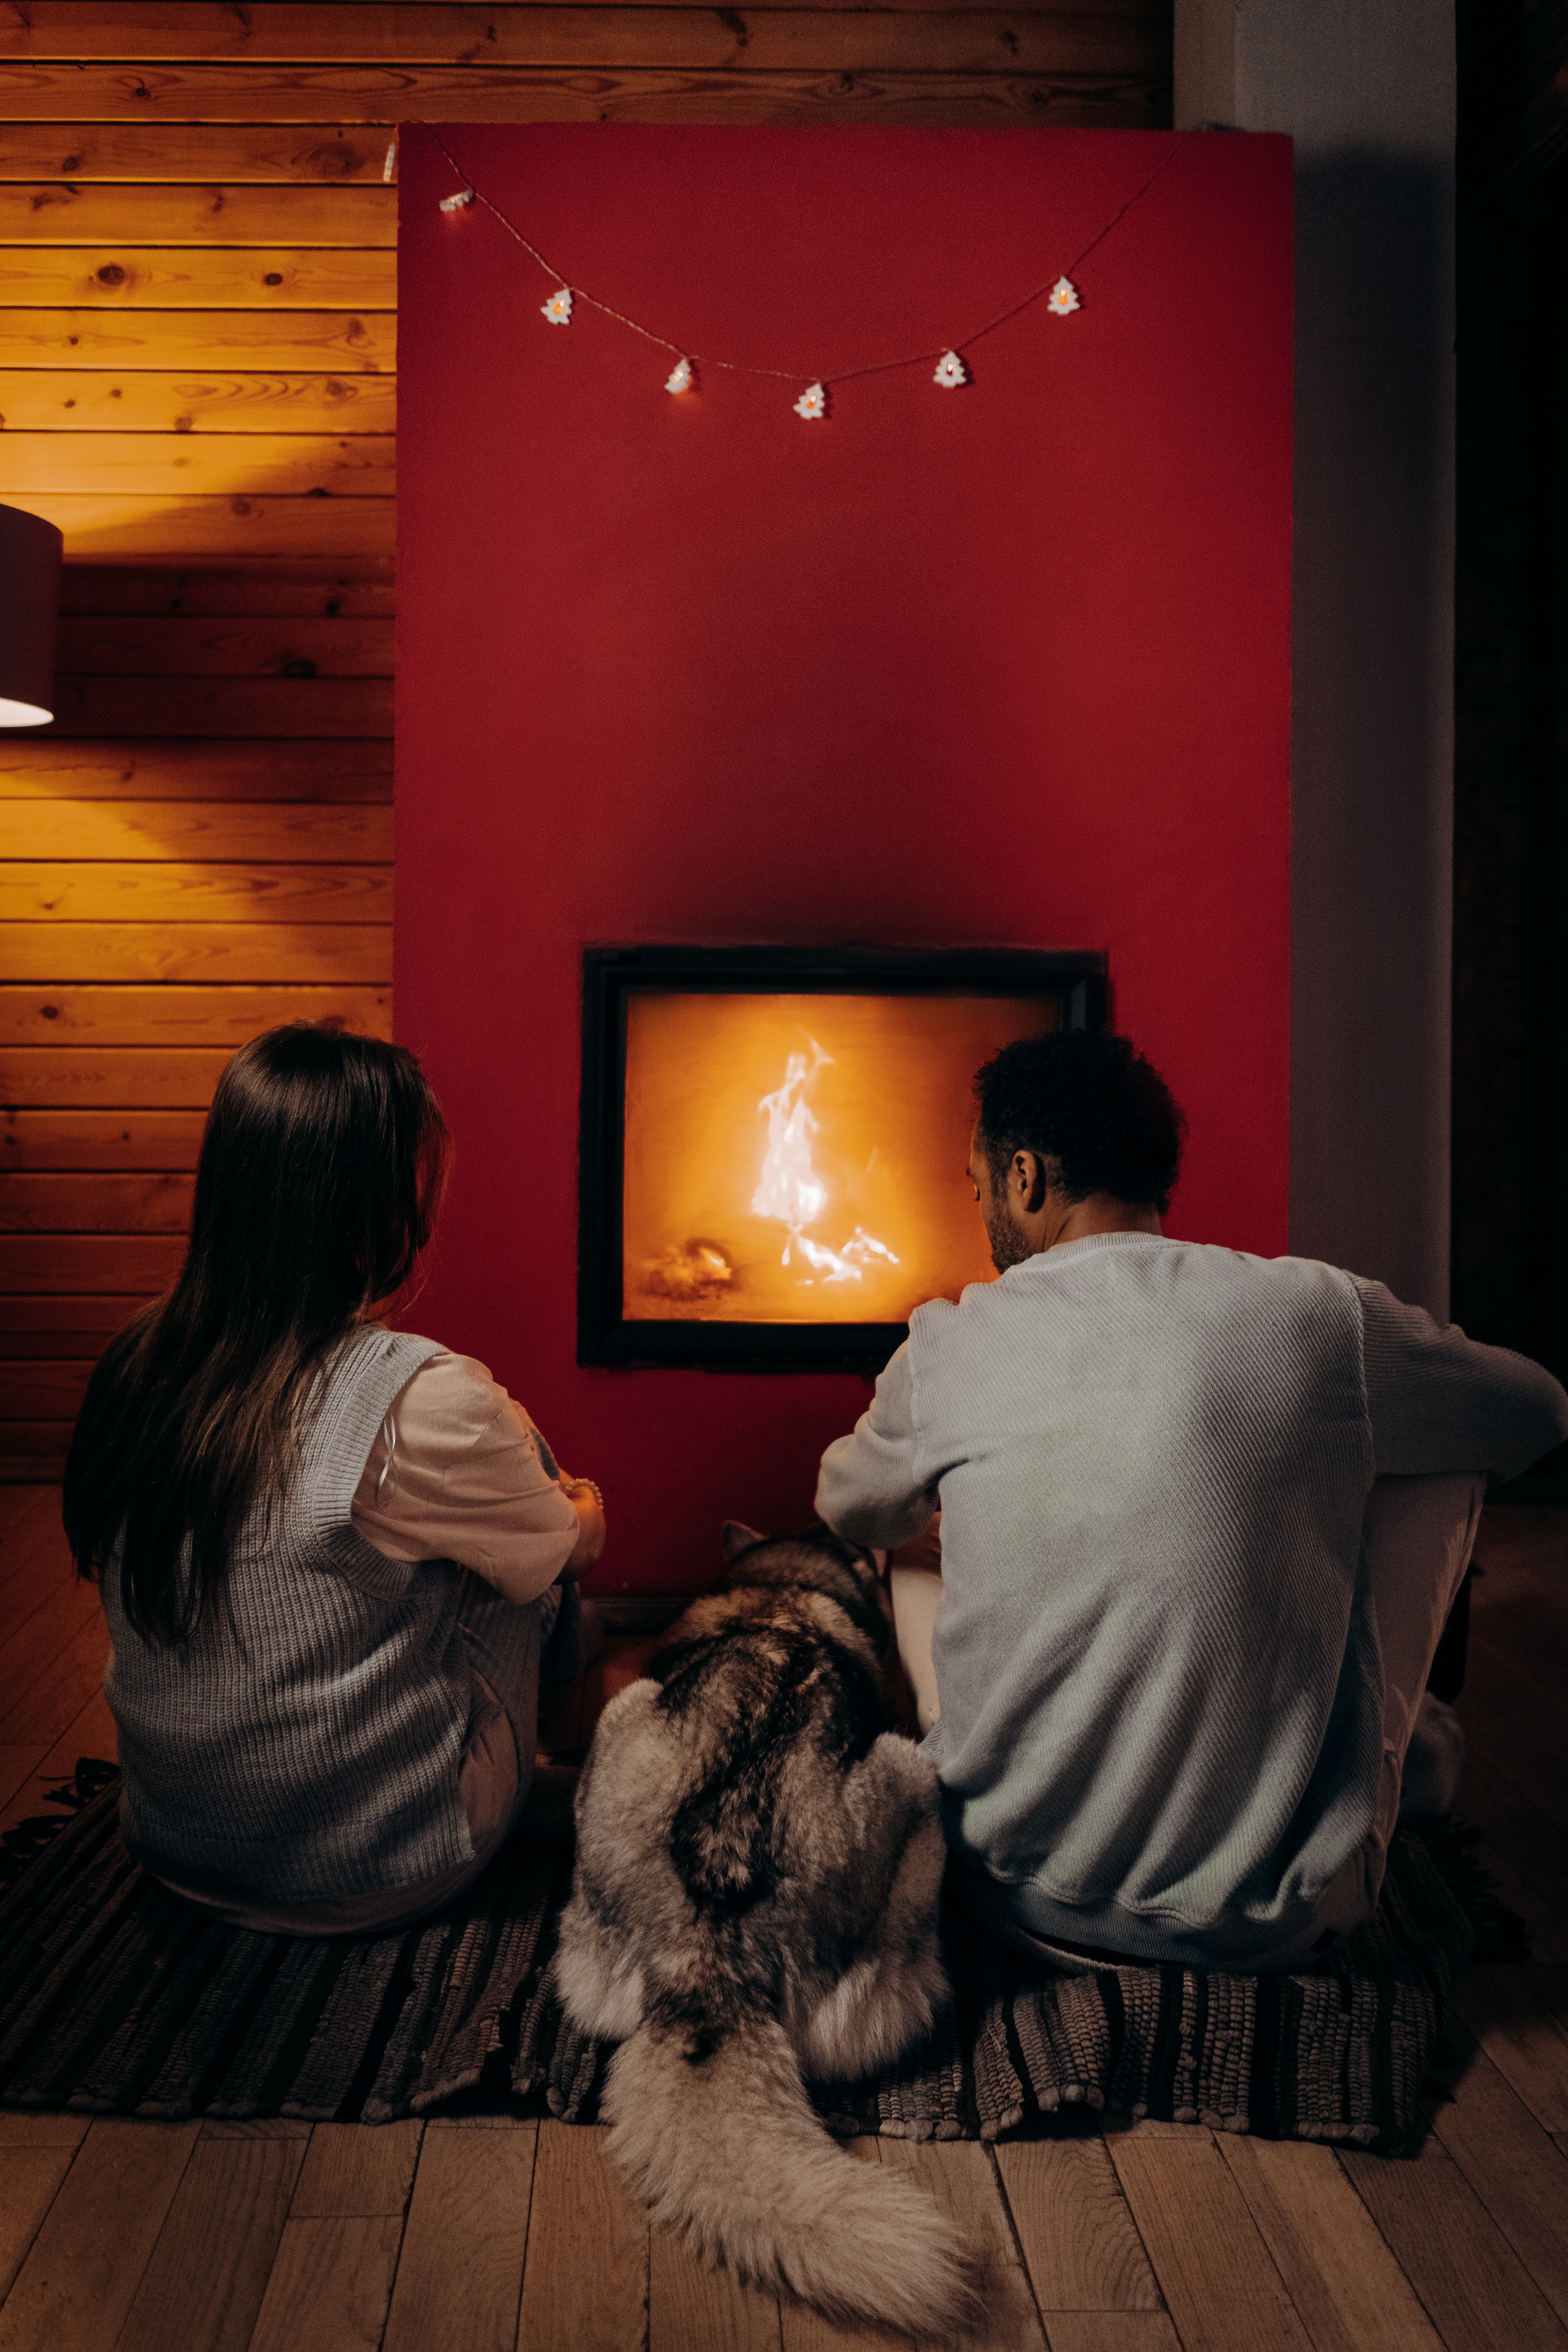 A couple sitting in front of a fireplace with their dog. | Source: Unsplash